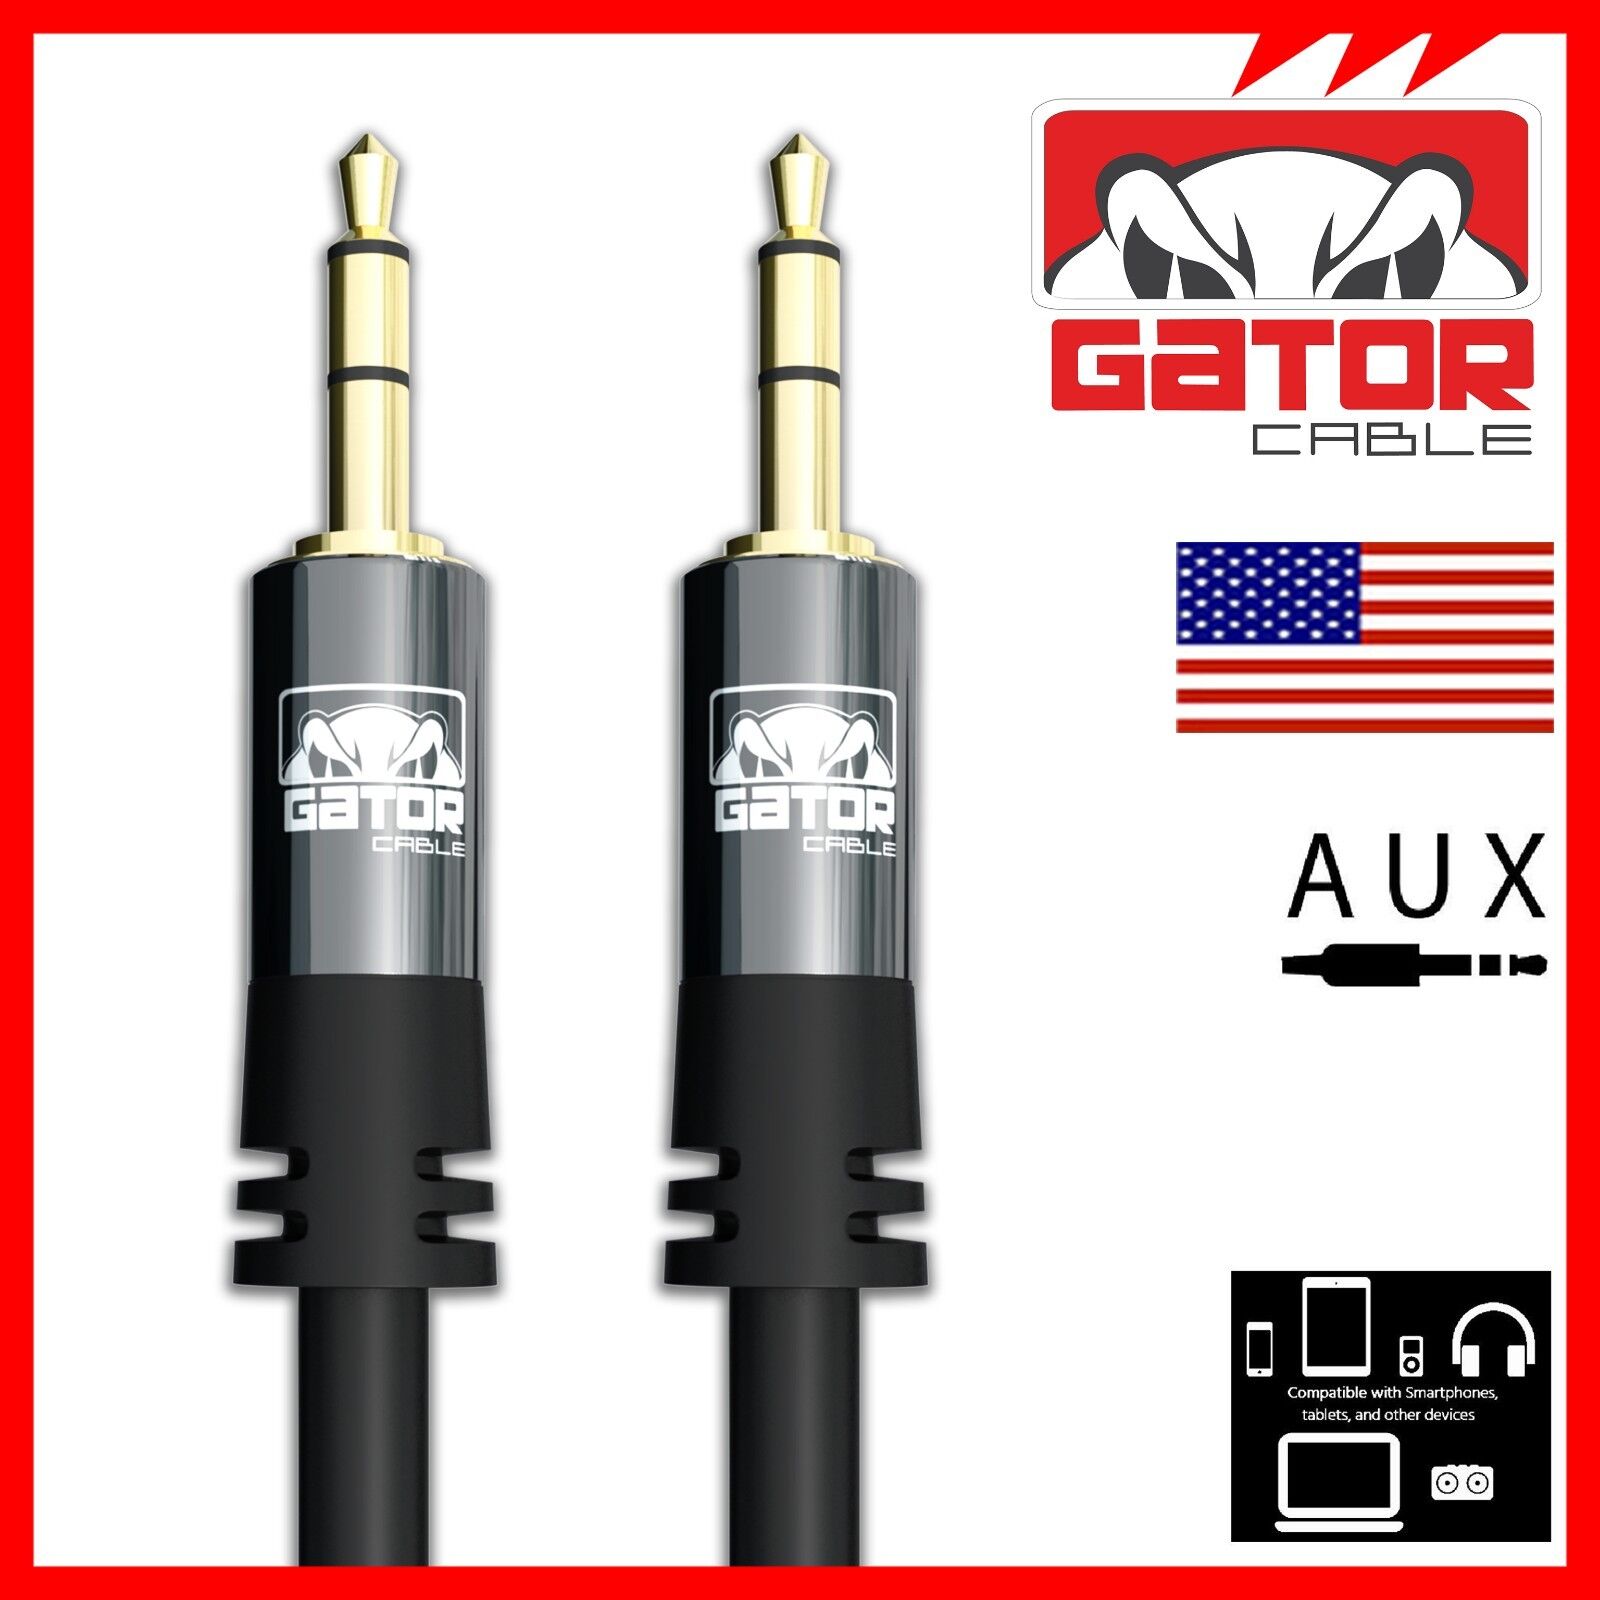 AUX 3.5mm Audio Cable Cord Male to Male For Phone iPhone Samsung LG Earphones Gator Cable AUX-3.5mm-Male-to-Male - фотография #11